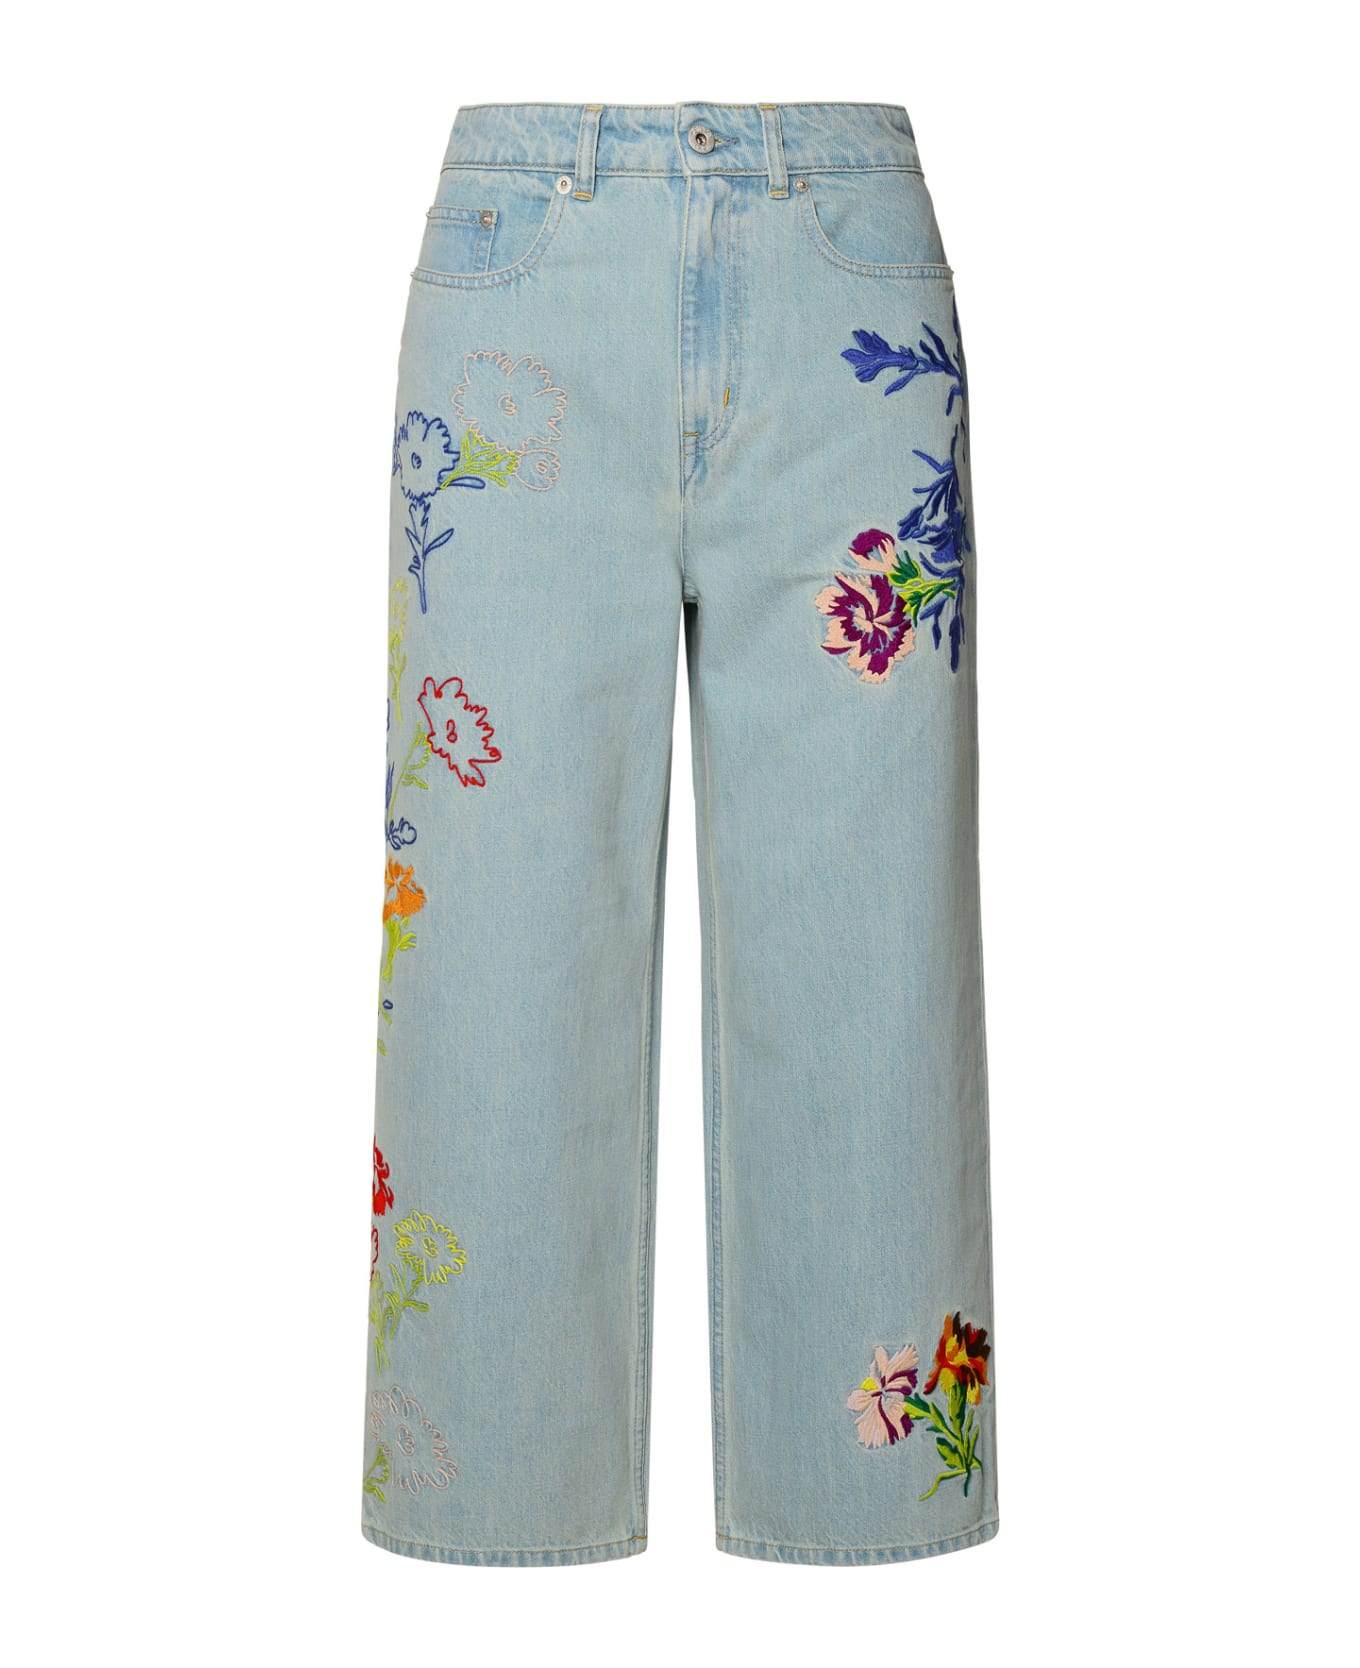 Kenzo Flower Jeans - STONE BLEACHED